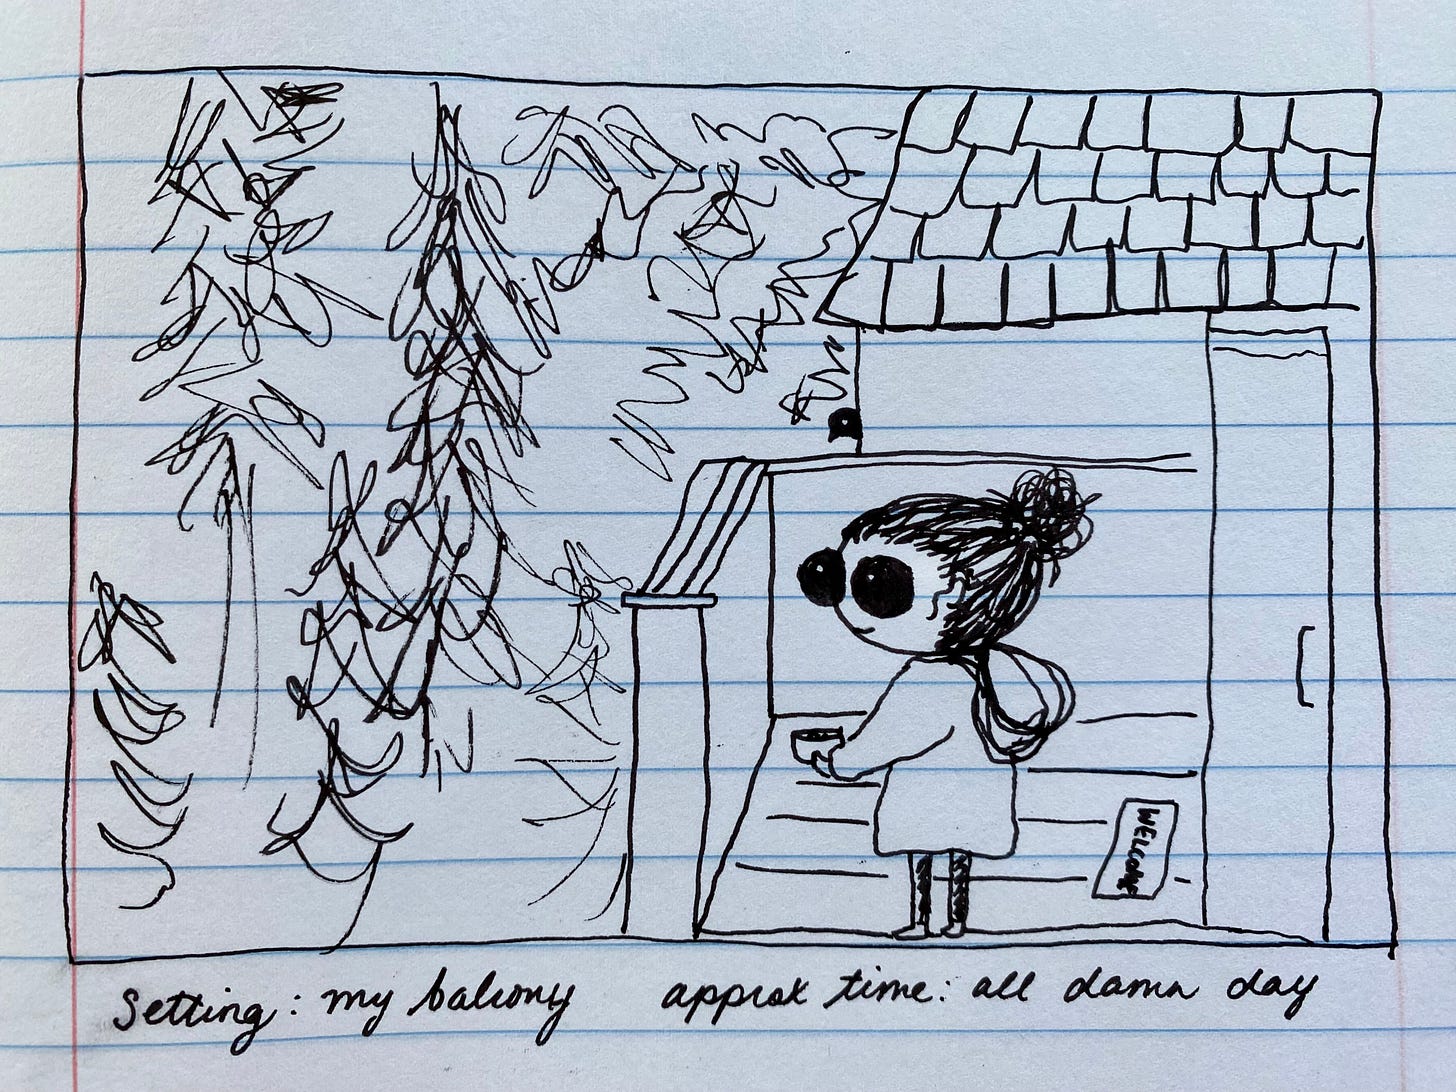  Final cartoon drawing in black ink on notebook paper of the big-headed, big-eyed figure wearing an oversized hoodie and standing on a balcony with a small dish in her hands. Conifer trees are visible in the distance. A crow peeks its head out from behind a neighboring wall.